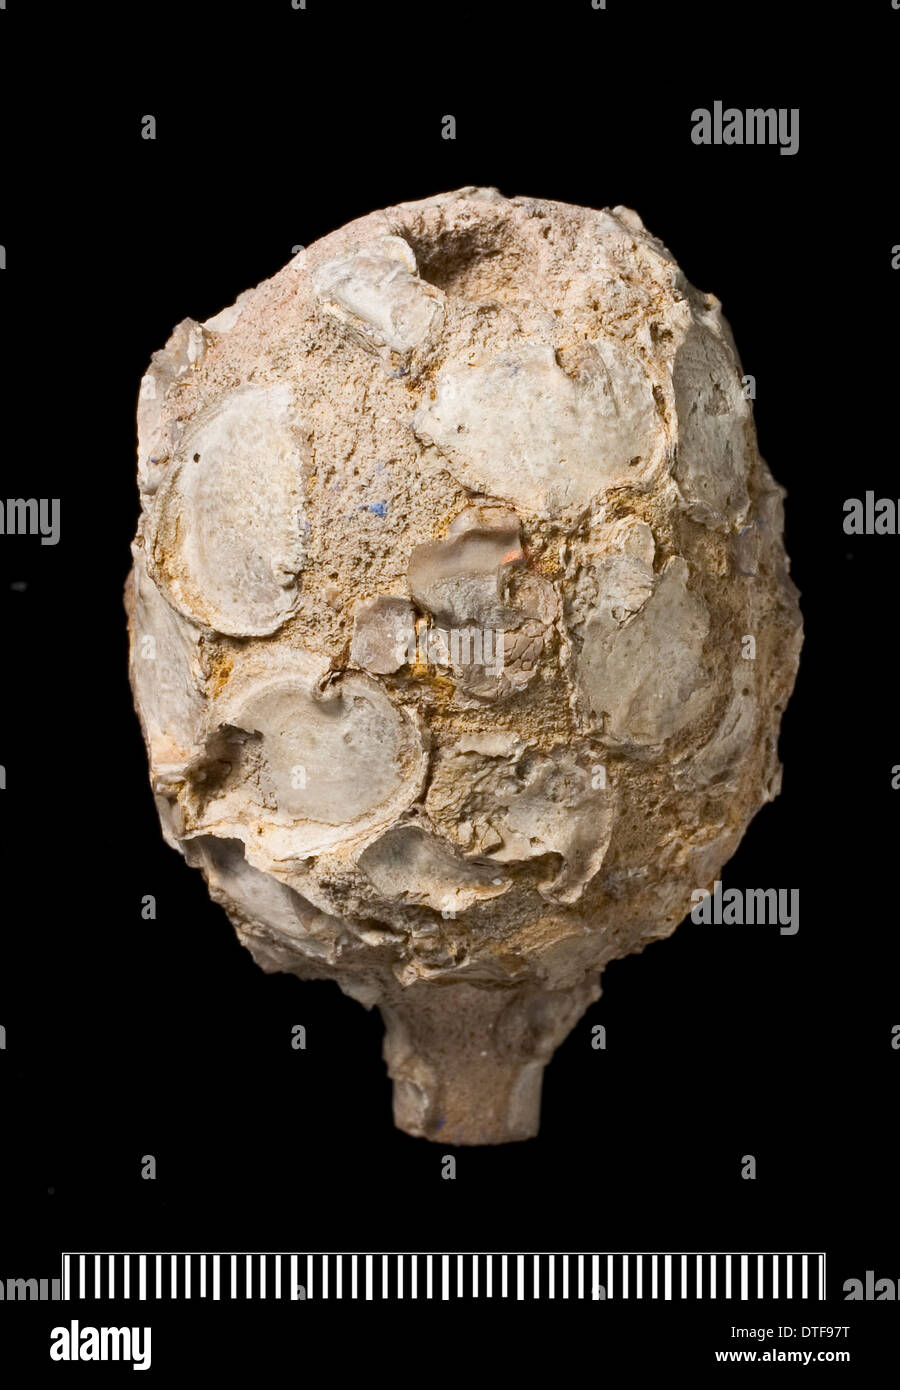 Siphonia, a fossil sponge Stock Photo